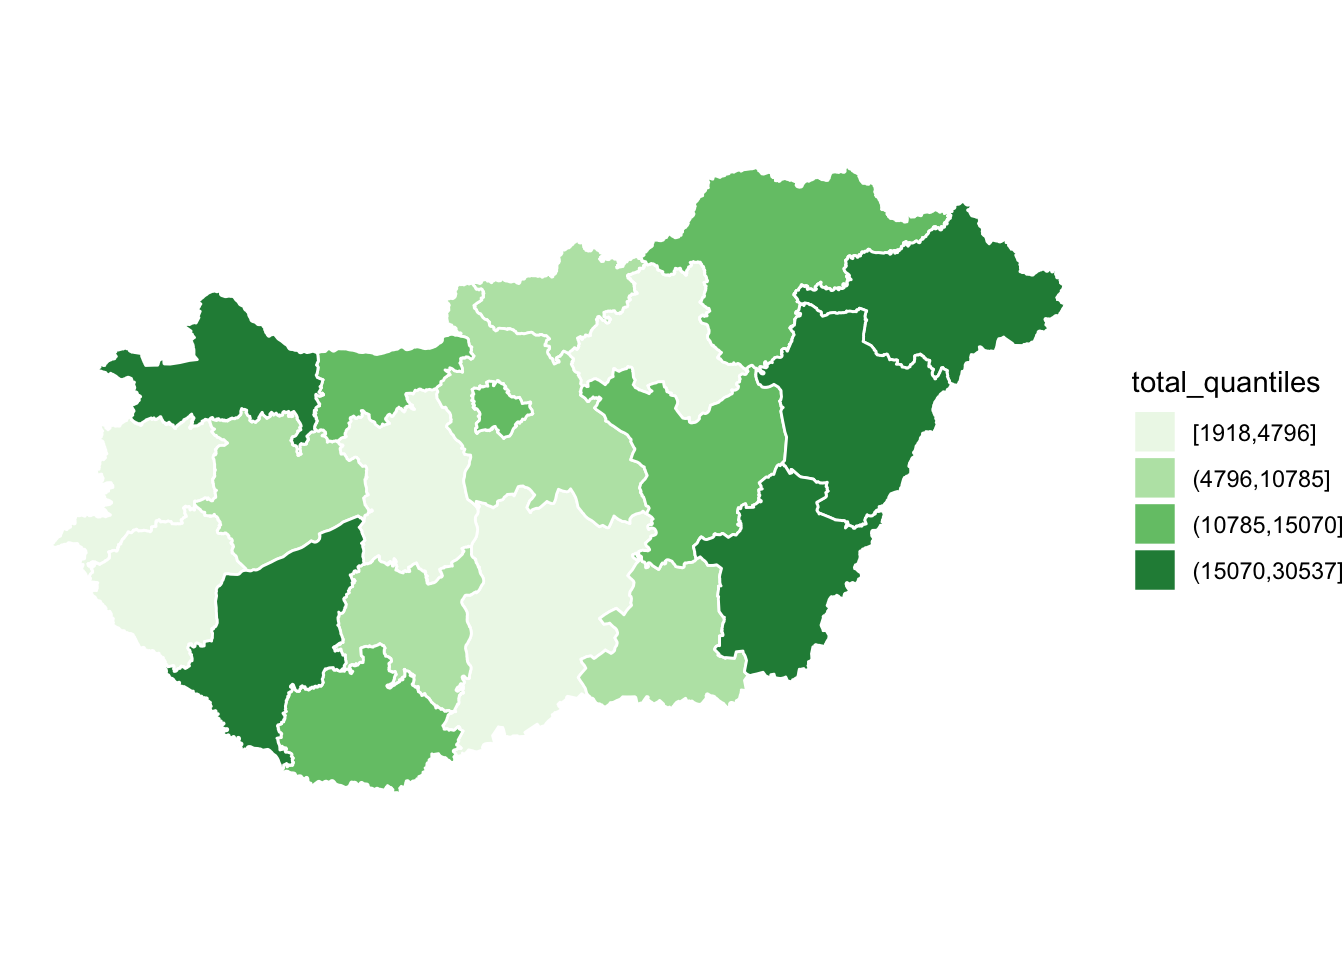 The same map, now in shades of light green to dark green. The lighter greens corresponds to the smaller 'total quantiles' here.